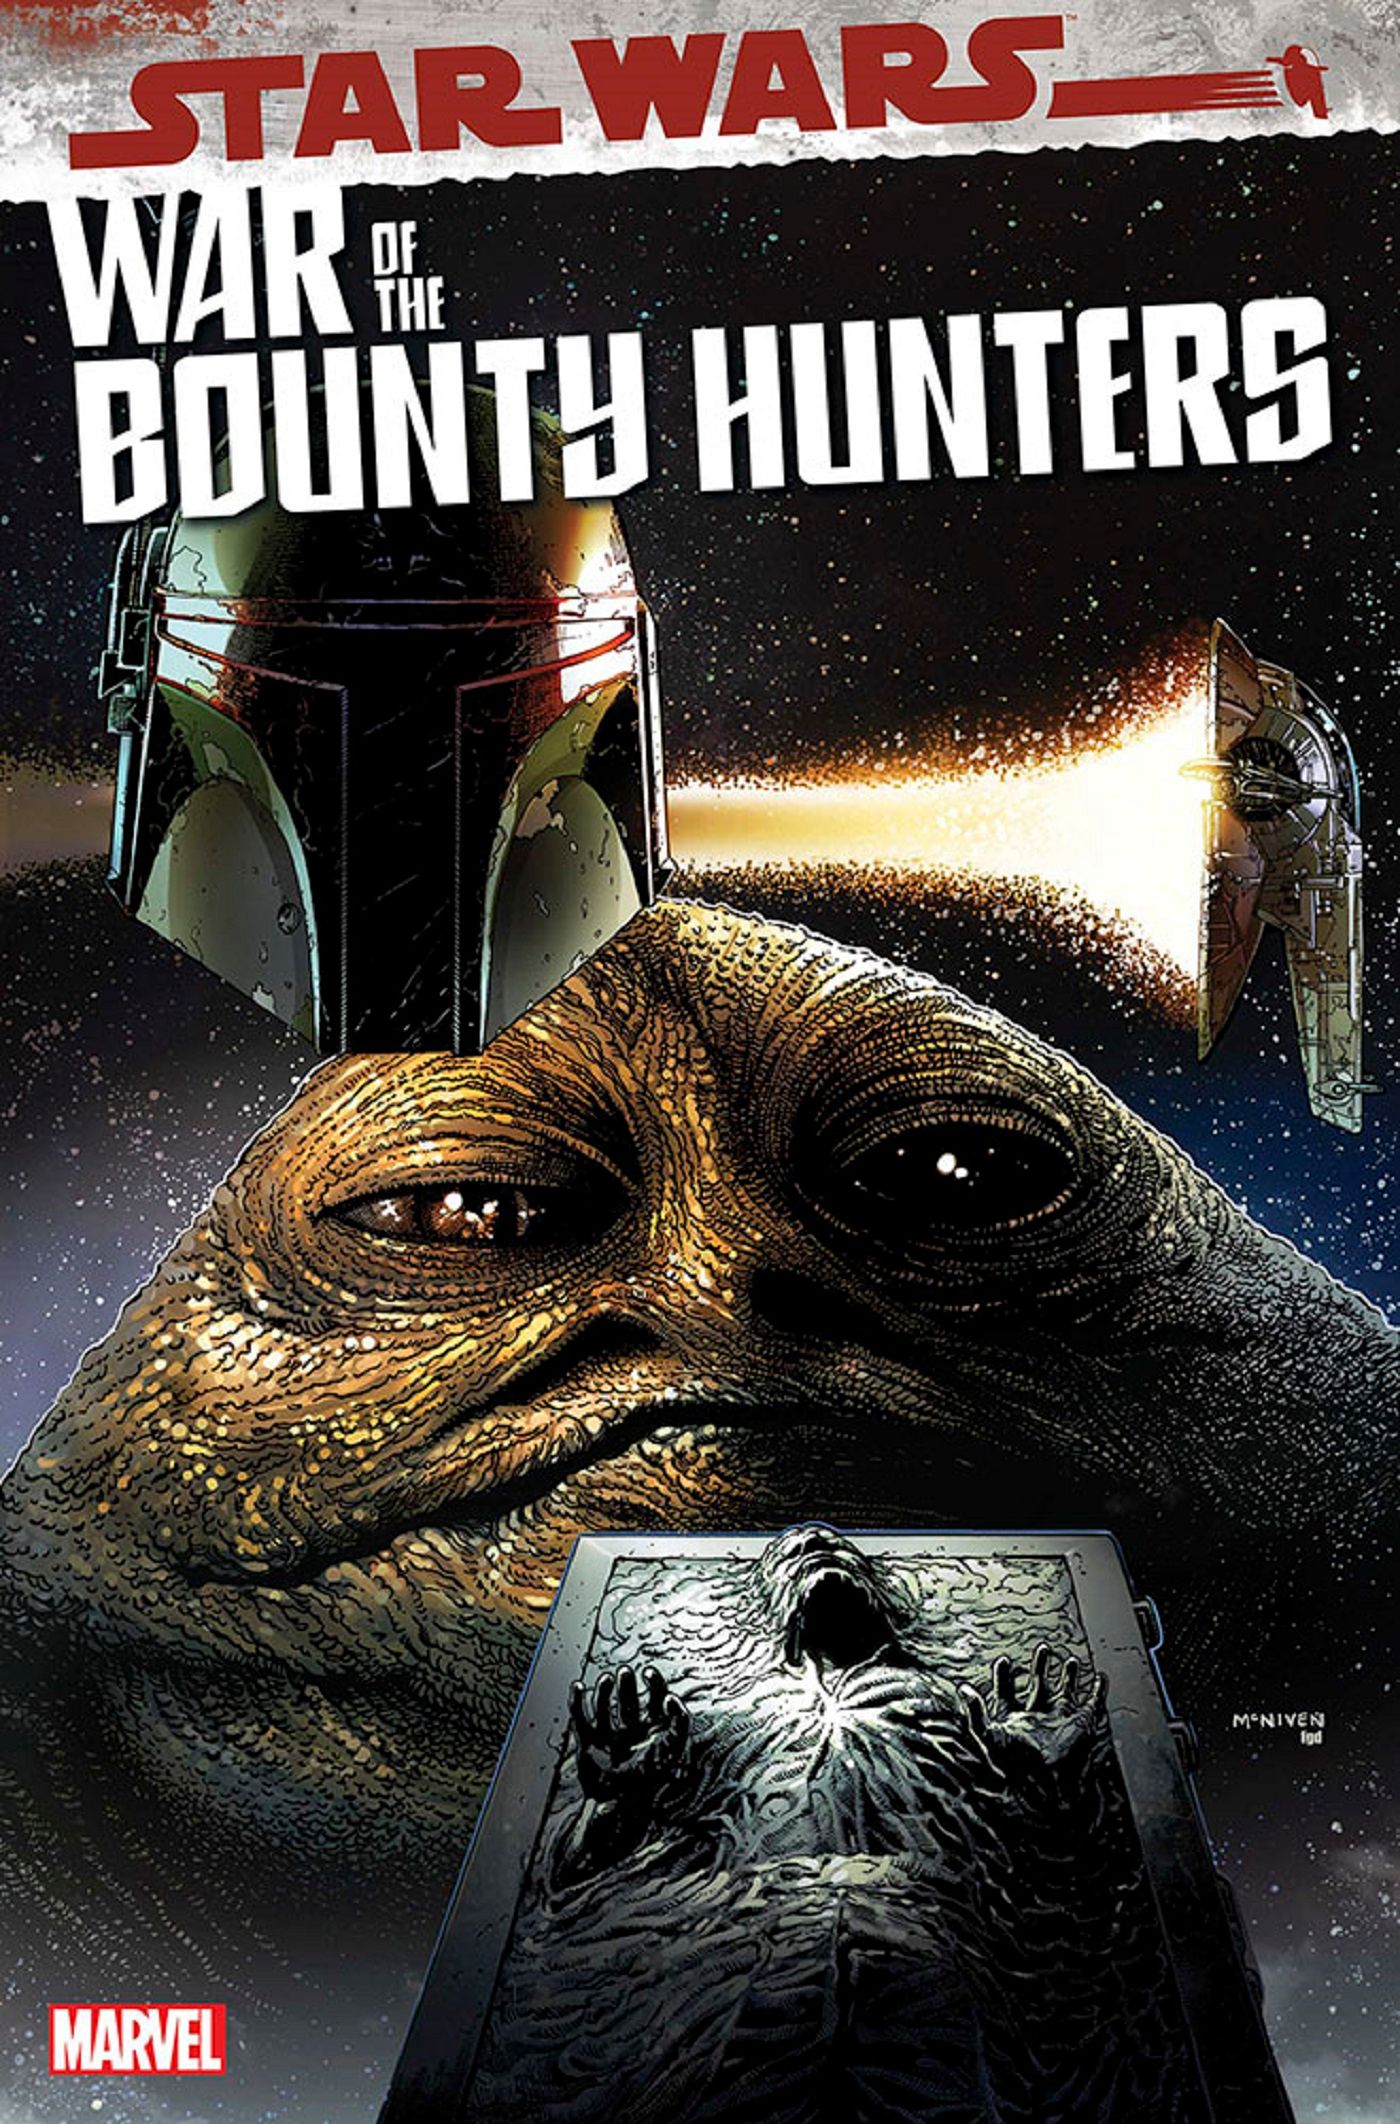 Boba Fett Faces His Greatest Challenge in War of the Bounty Hunters